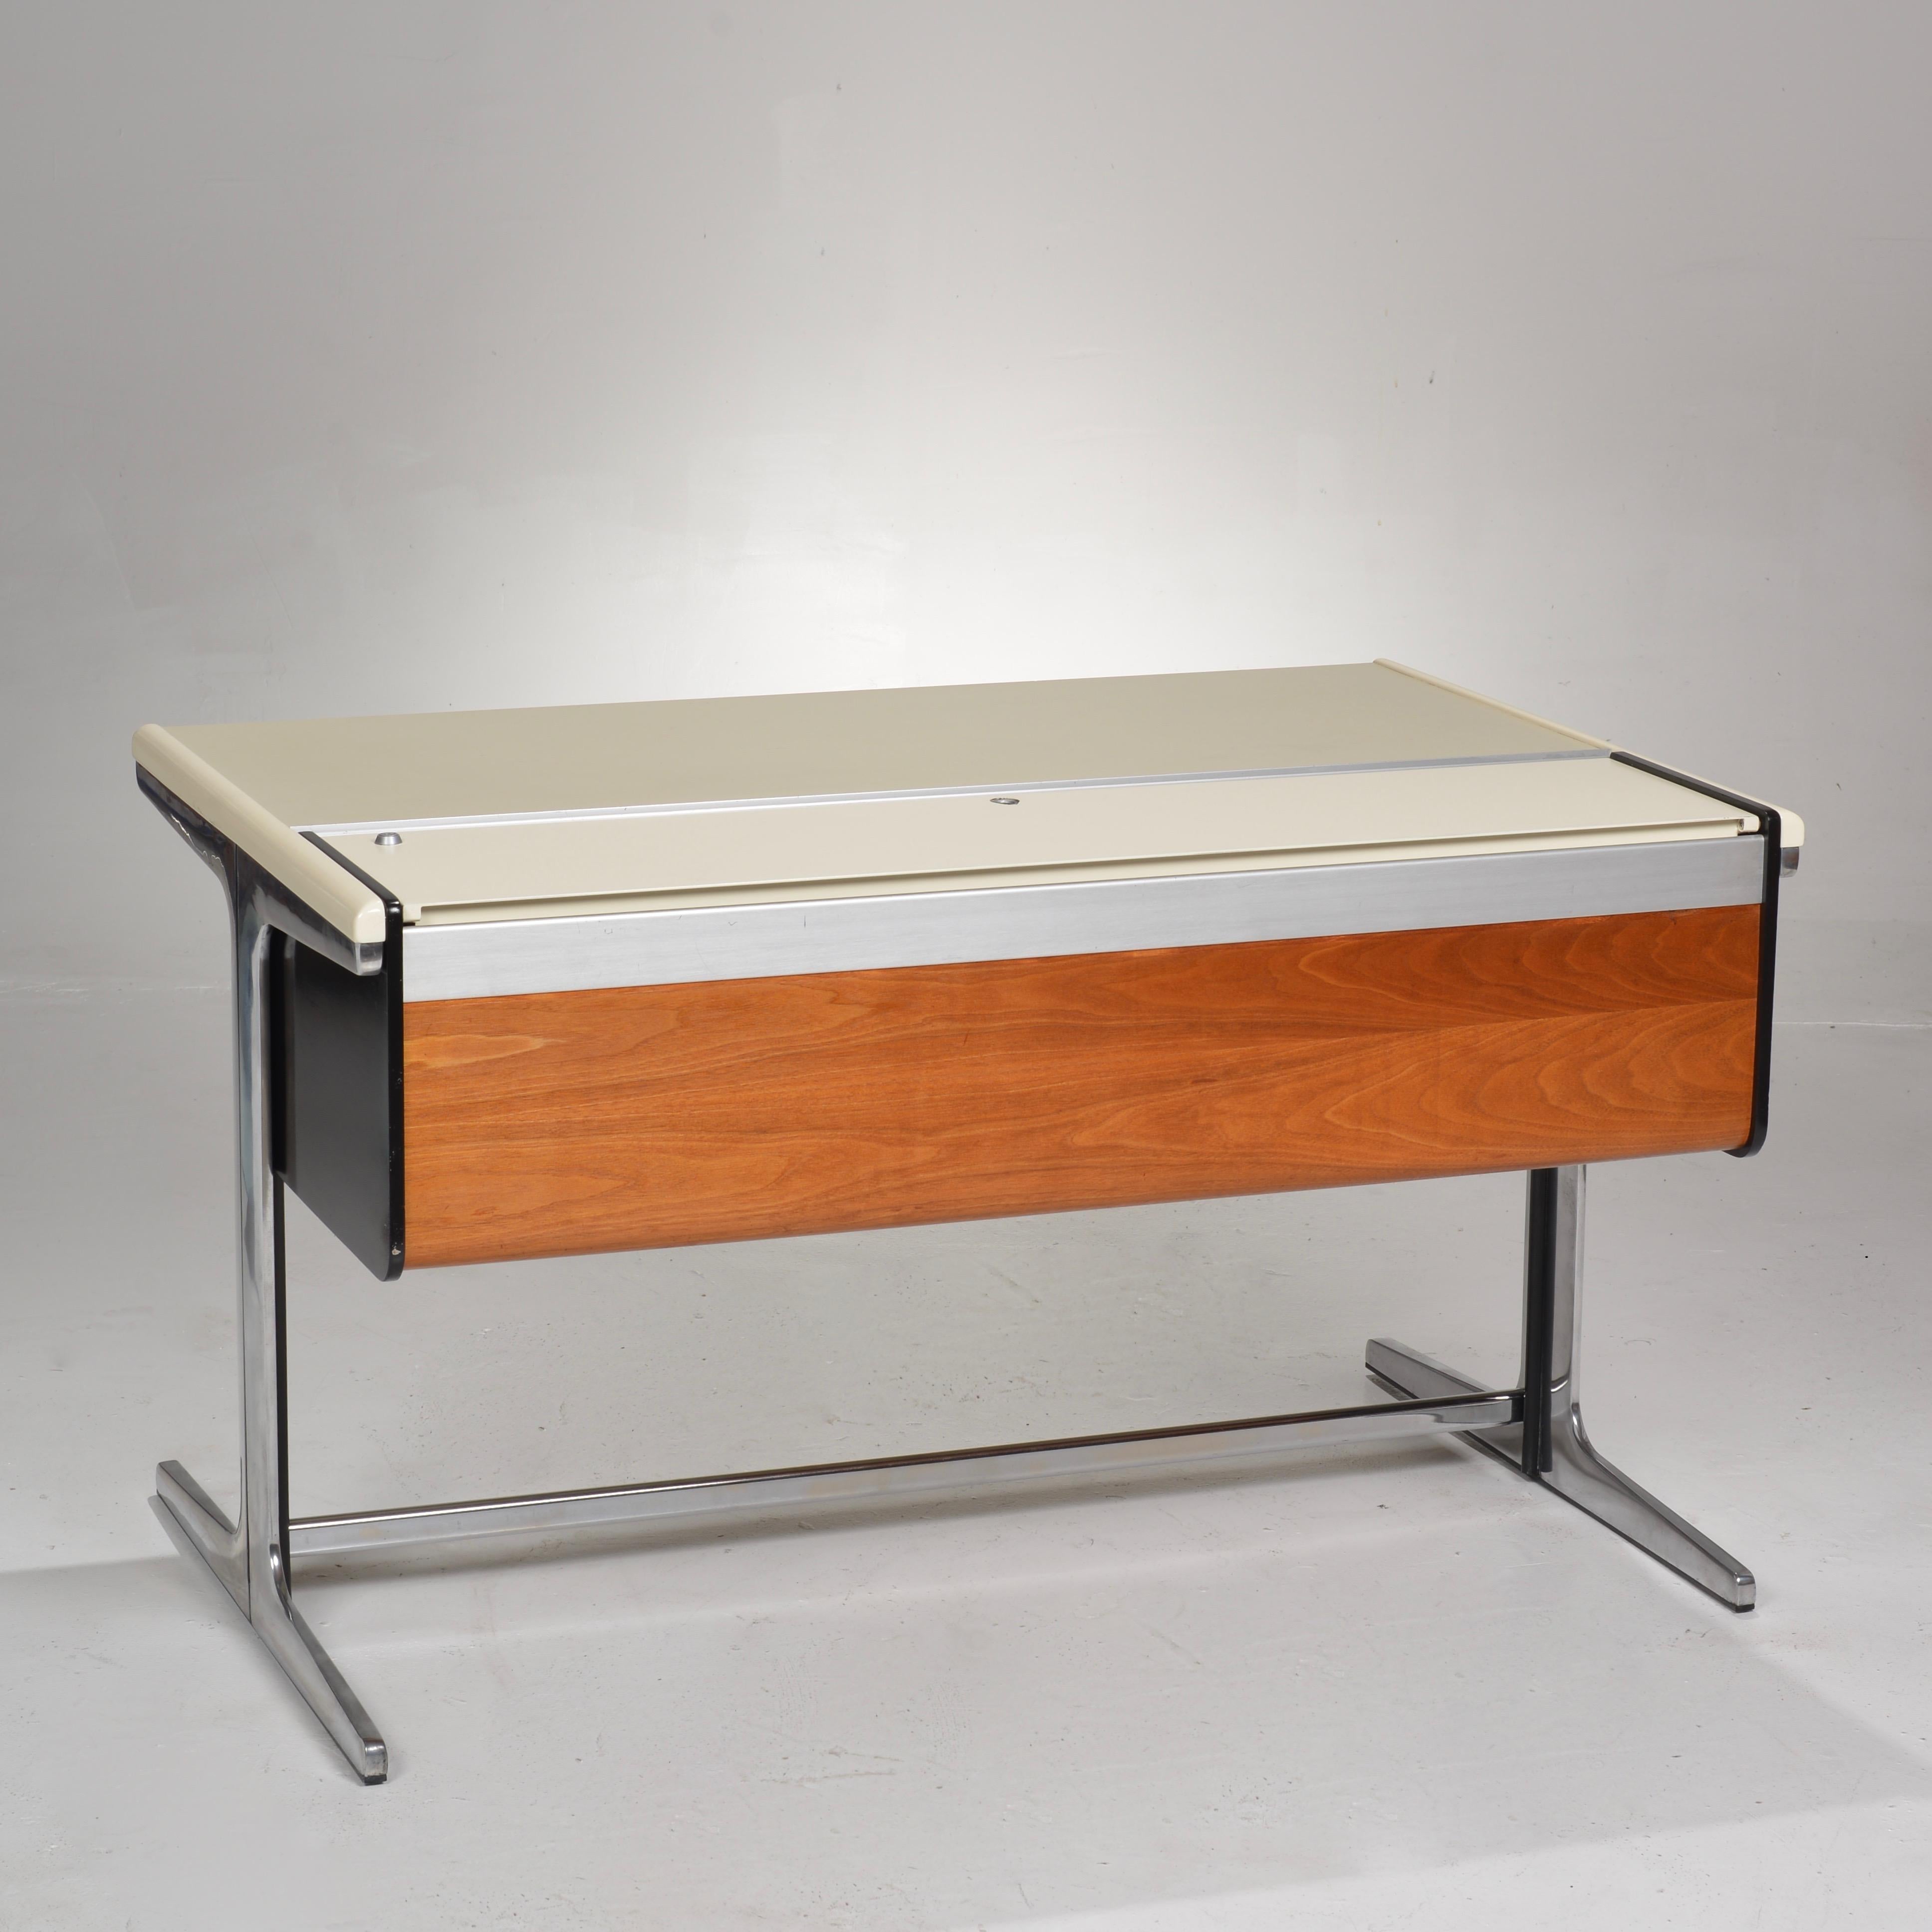 Early George Nelson Action Office 1 desk in original condition with minor wear.
George Nelson for Herman Miller, polished aluminum, plastic laminate, wood, United States, design 1953.